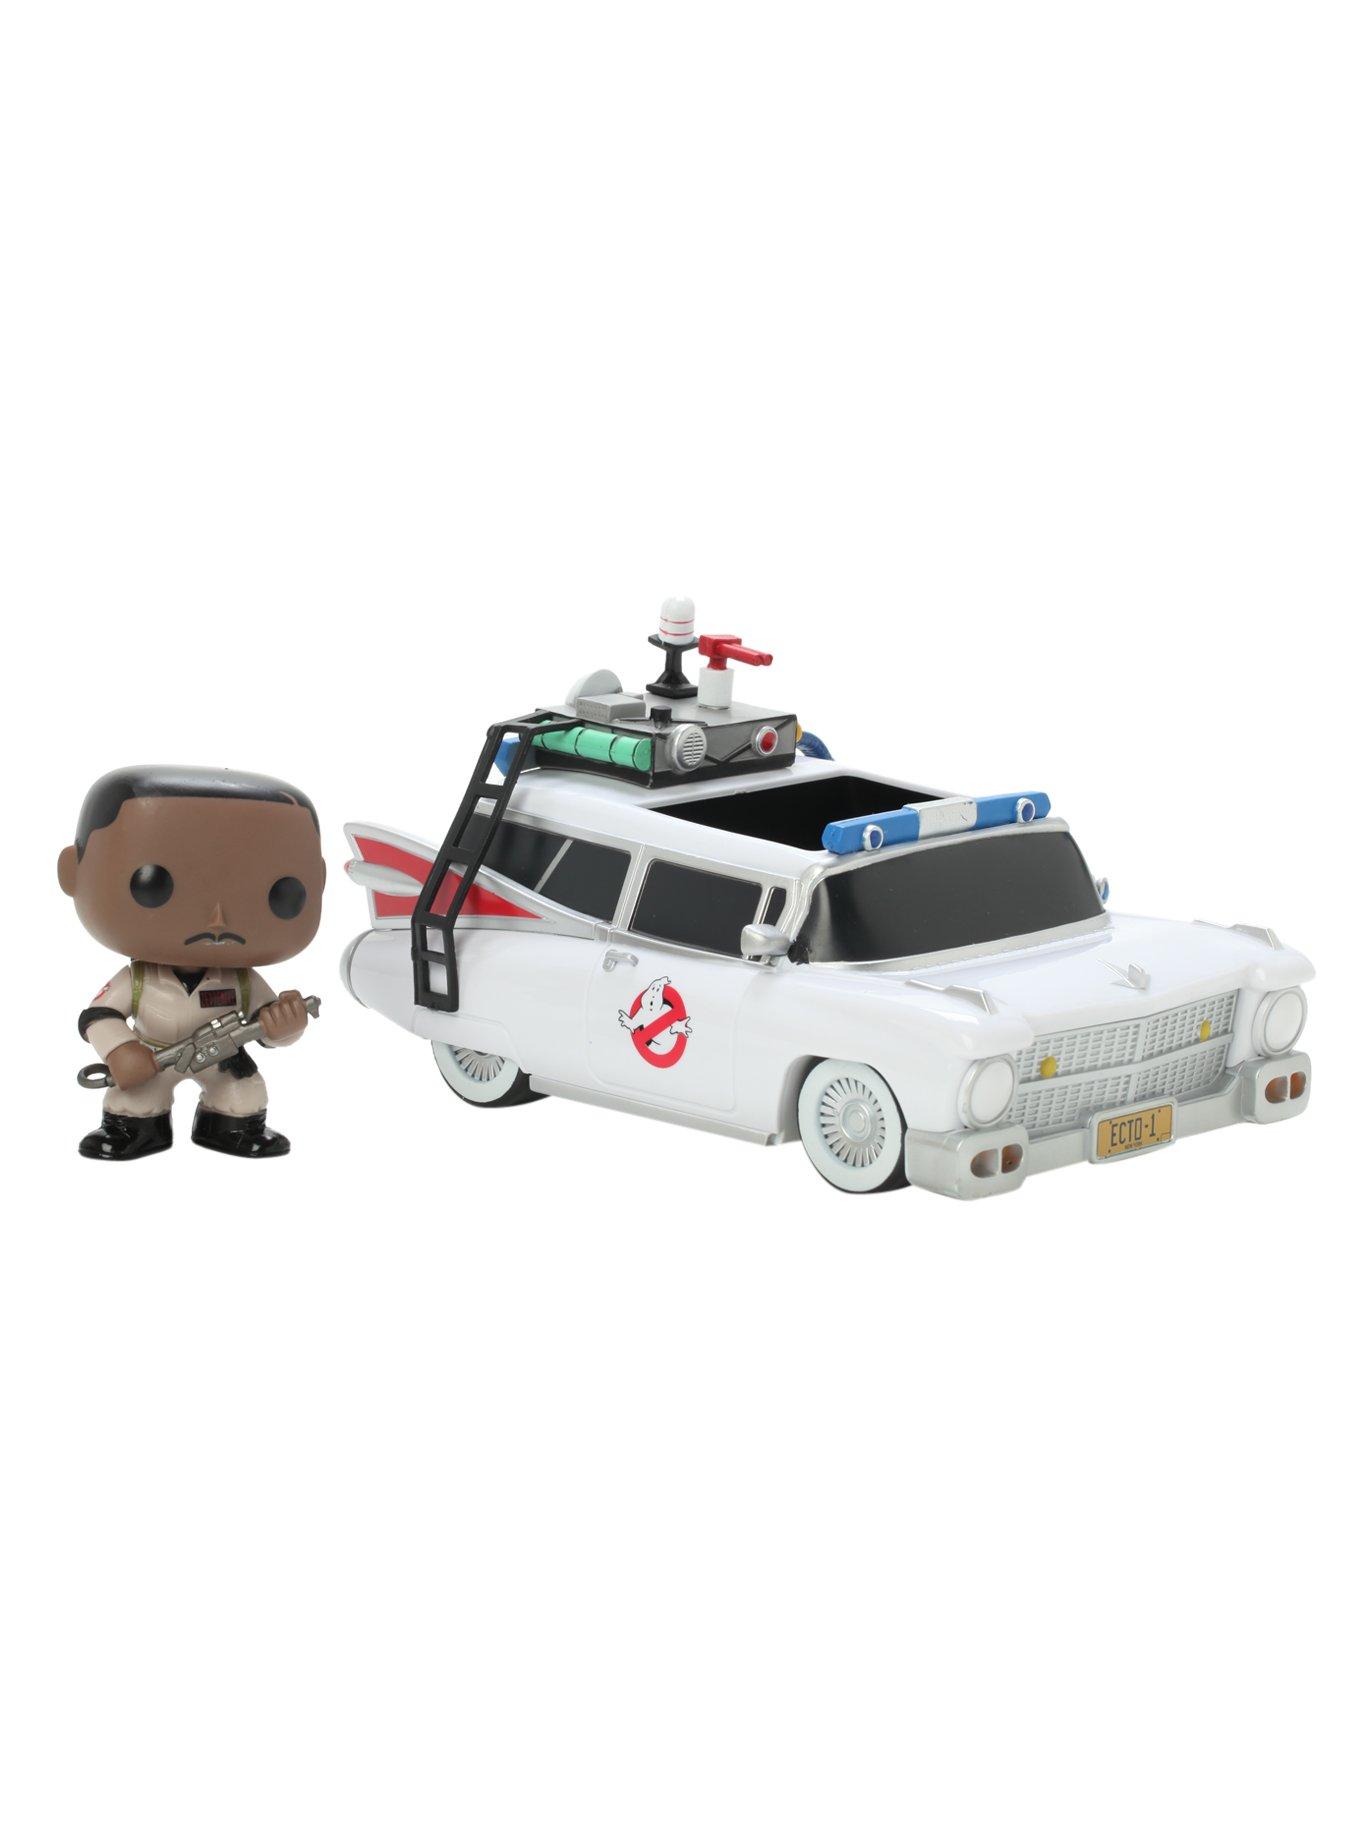 The mystery behind the Ghostbusters Ecto-1 rise in value